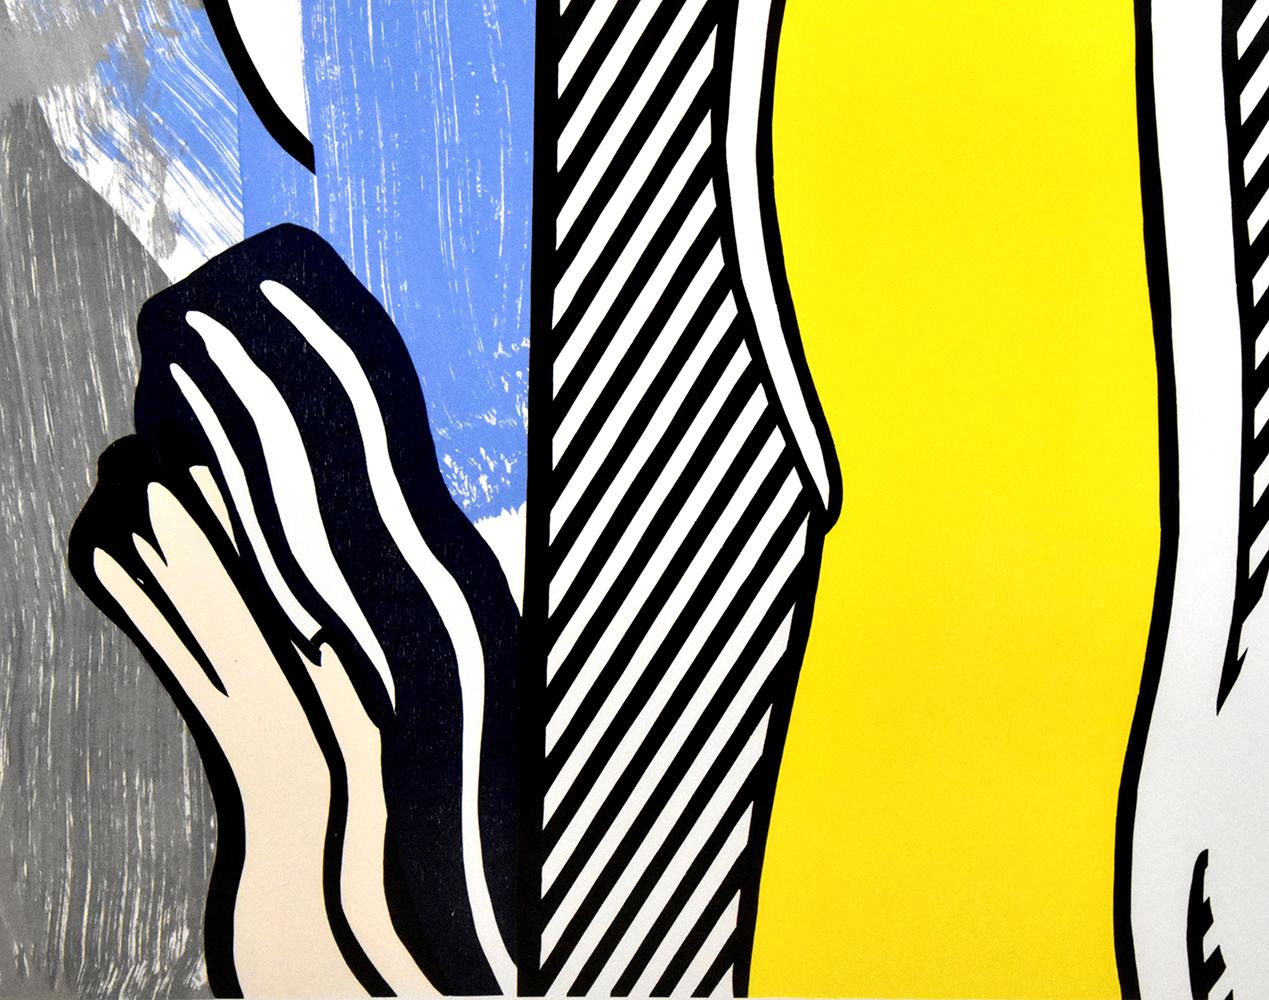 Roy Lichtenstein Two Paintings: Dagwood, 1984 is a vivid, colorful piece that demonstrates the clever work of Lichtenstein’s varied oeuvre. The work is centered around the juxtaposition between subjects that evoke the artist’s own personal and